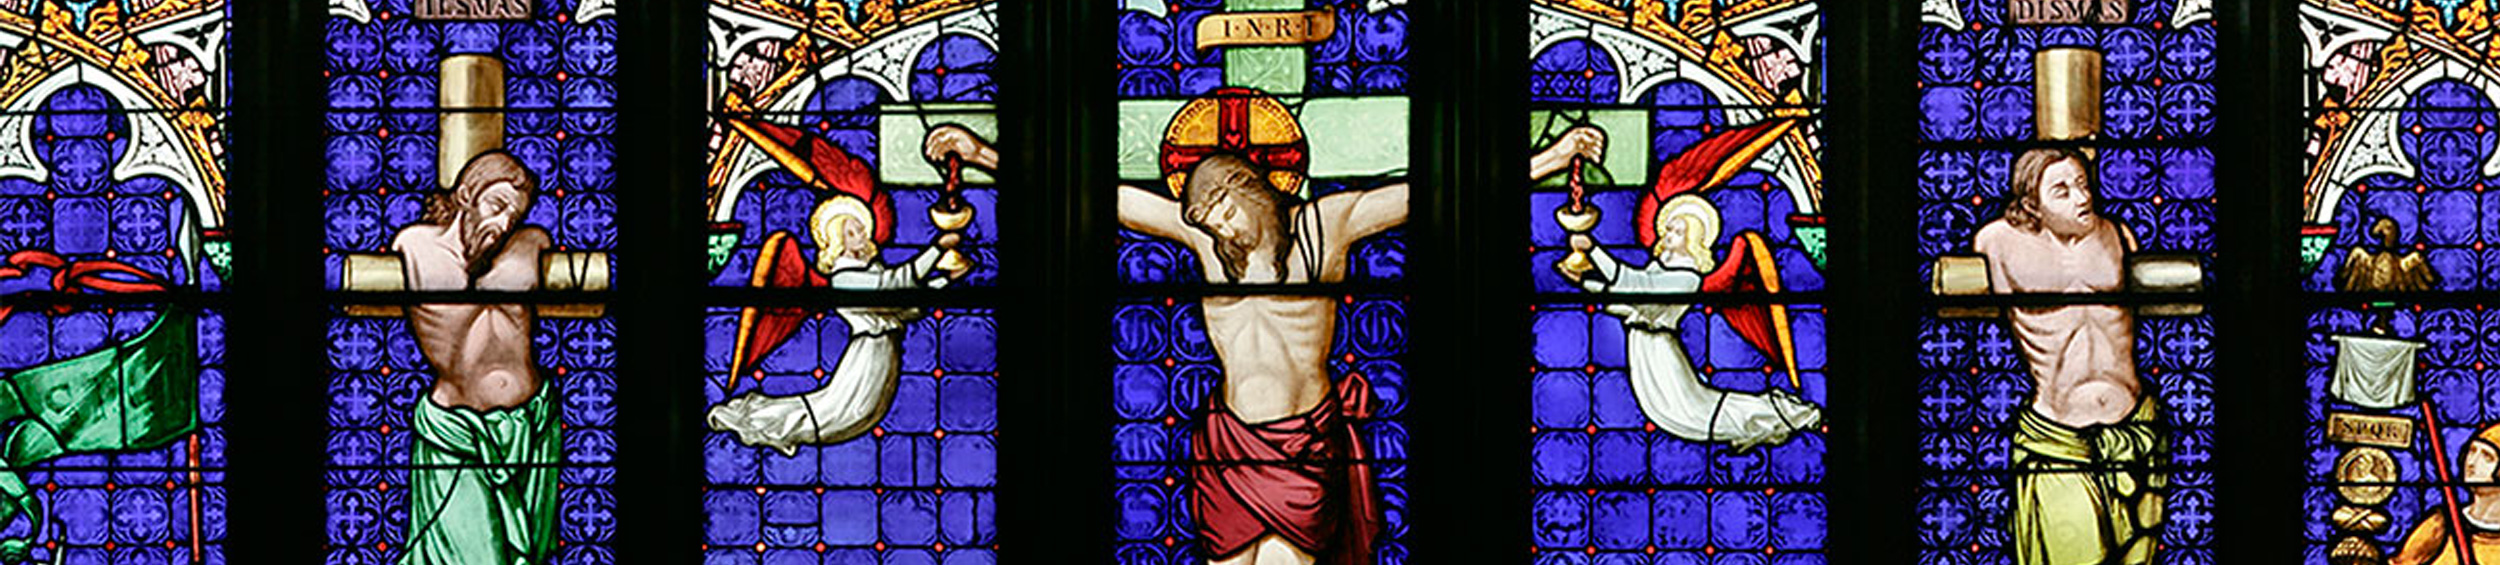 Stained glass window of Jesus on the Cross